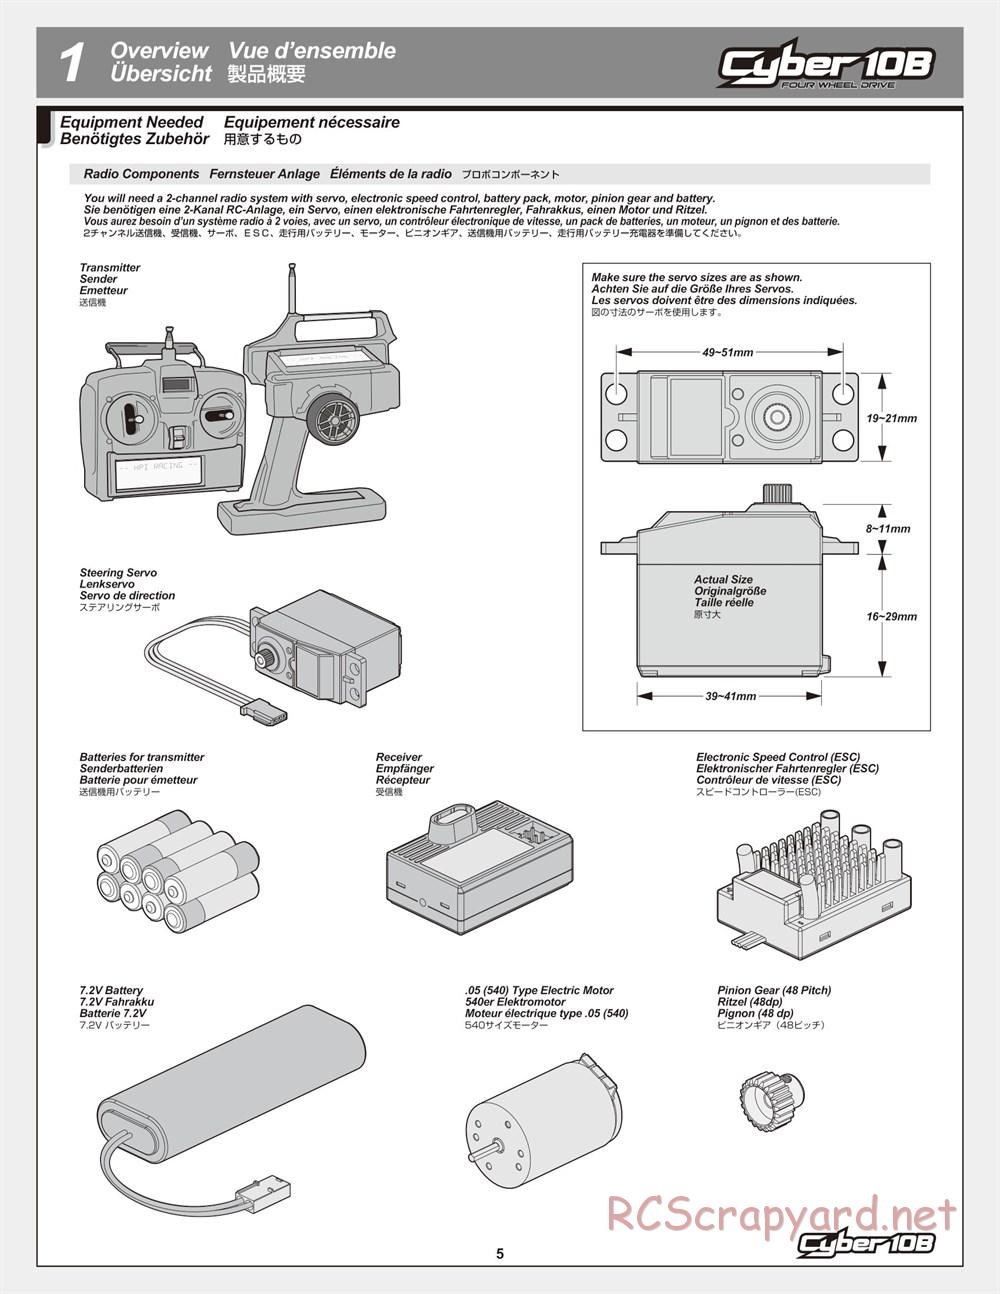 HPI - Cyber 10B - Manual - Page 5